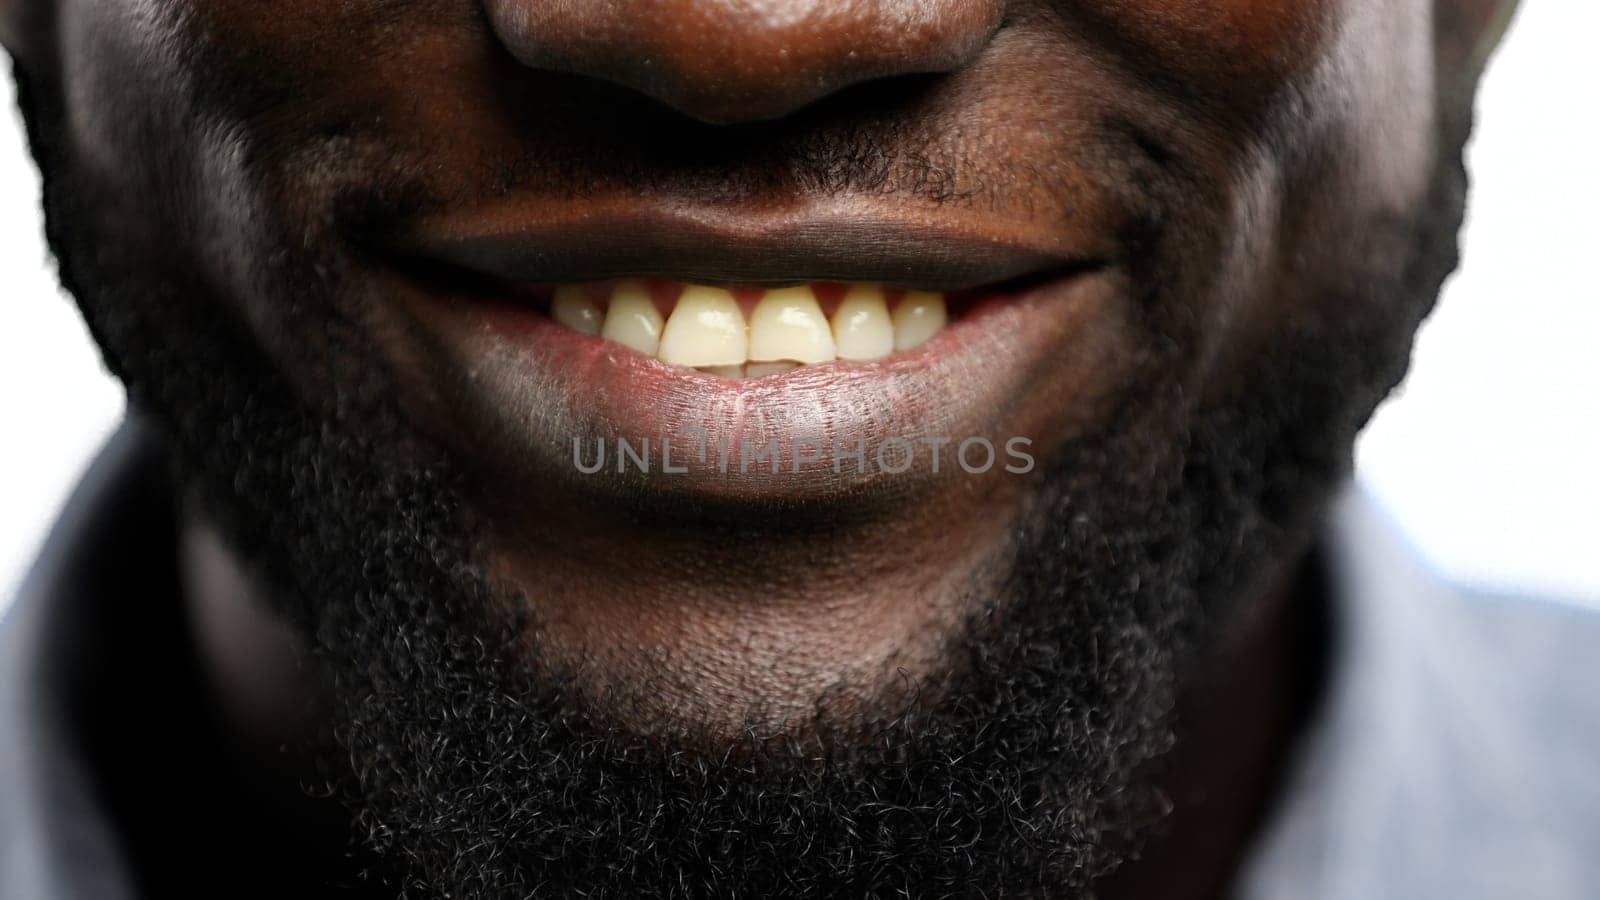 Man's mouth, close-up, on a white background by Prosto